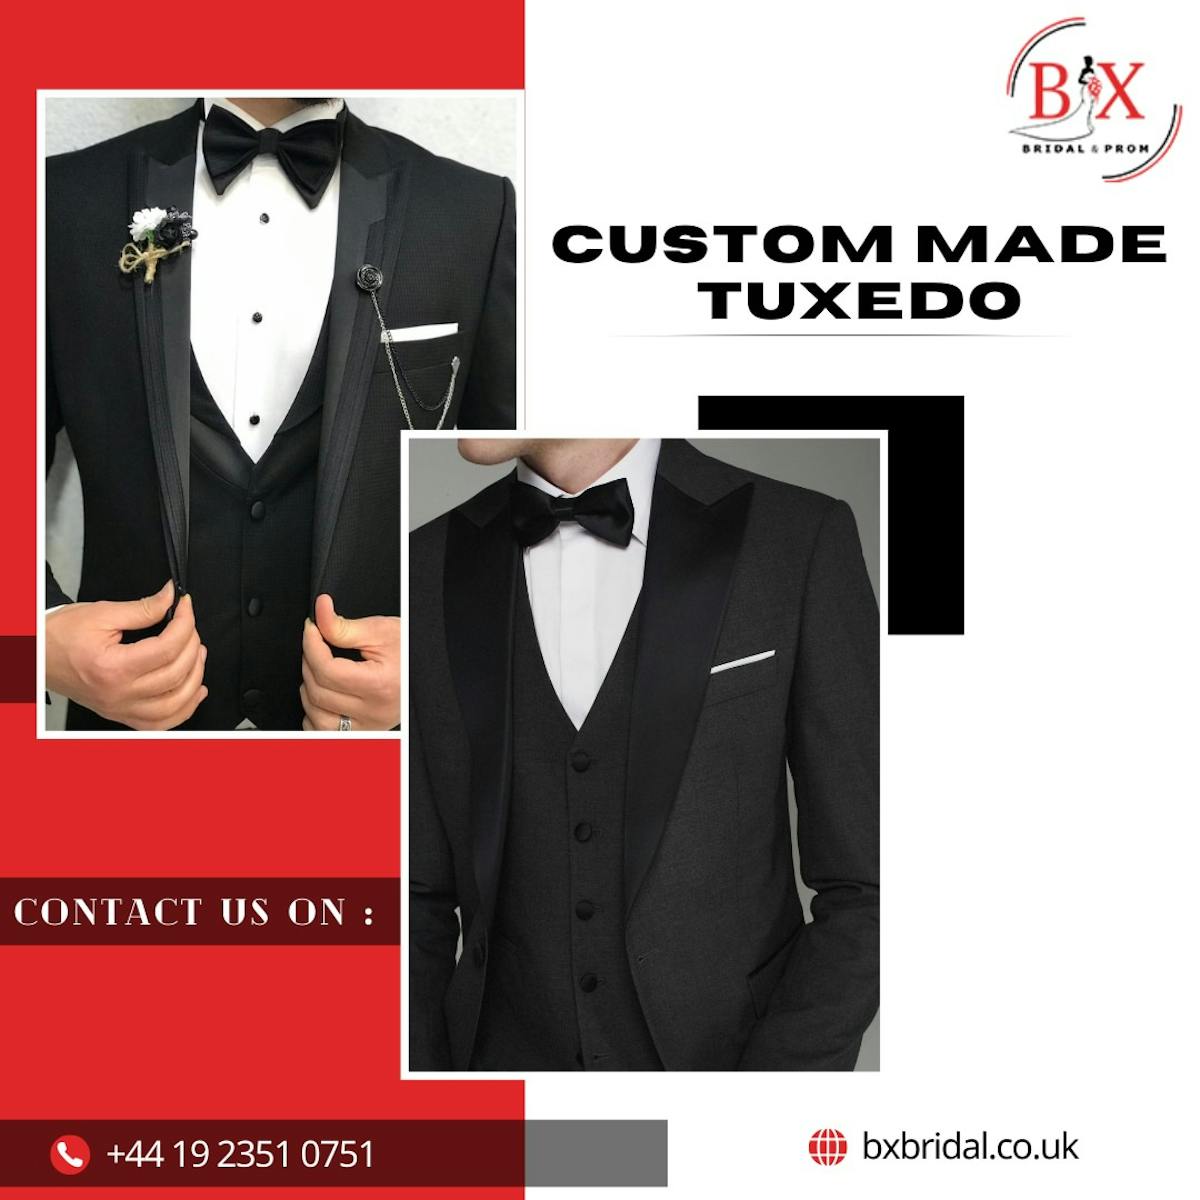 Upgrade Your Appearance by Opting For Custom Made Tuxedo Suit